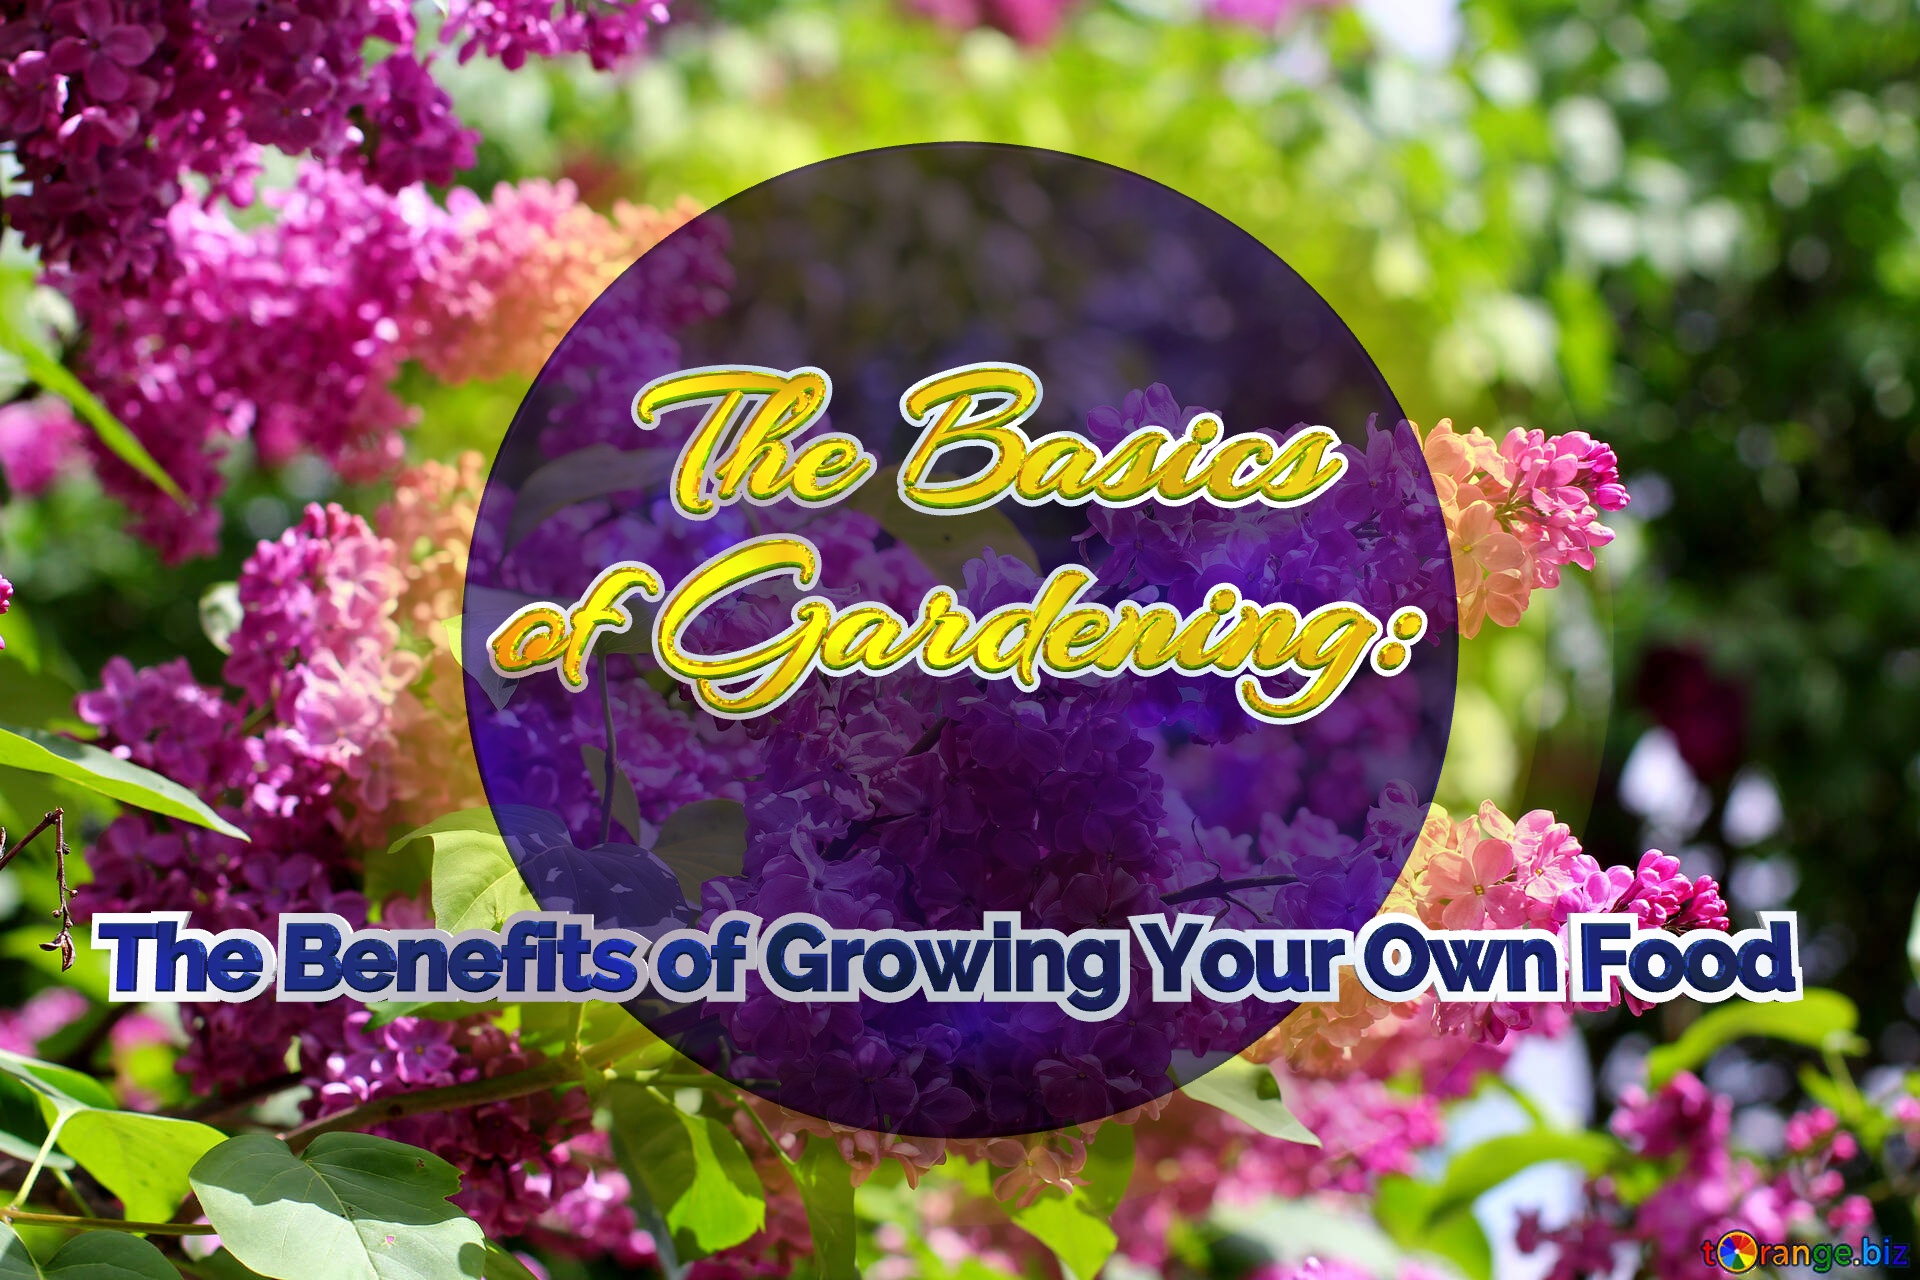    The Basics  of Gardening:   The Benefits of Growing Your Own Food  Bright picture with lilac flowers №37487